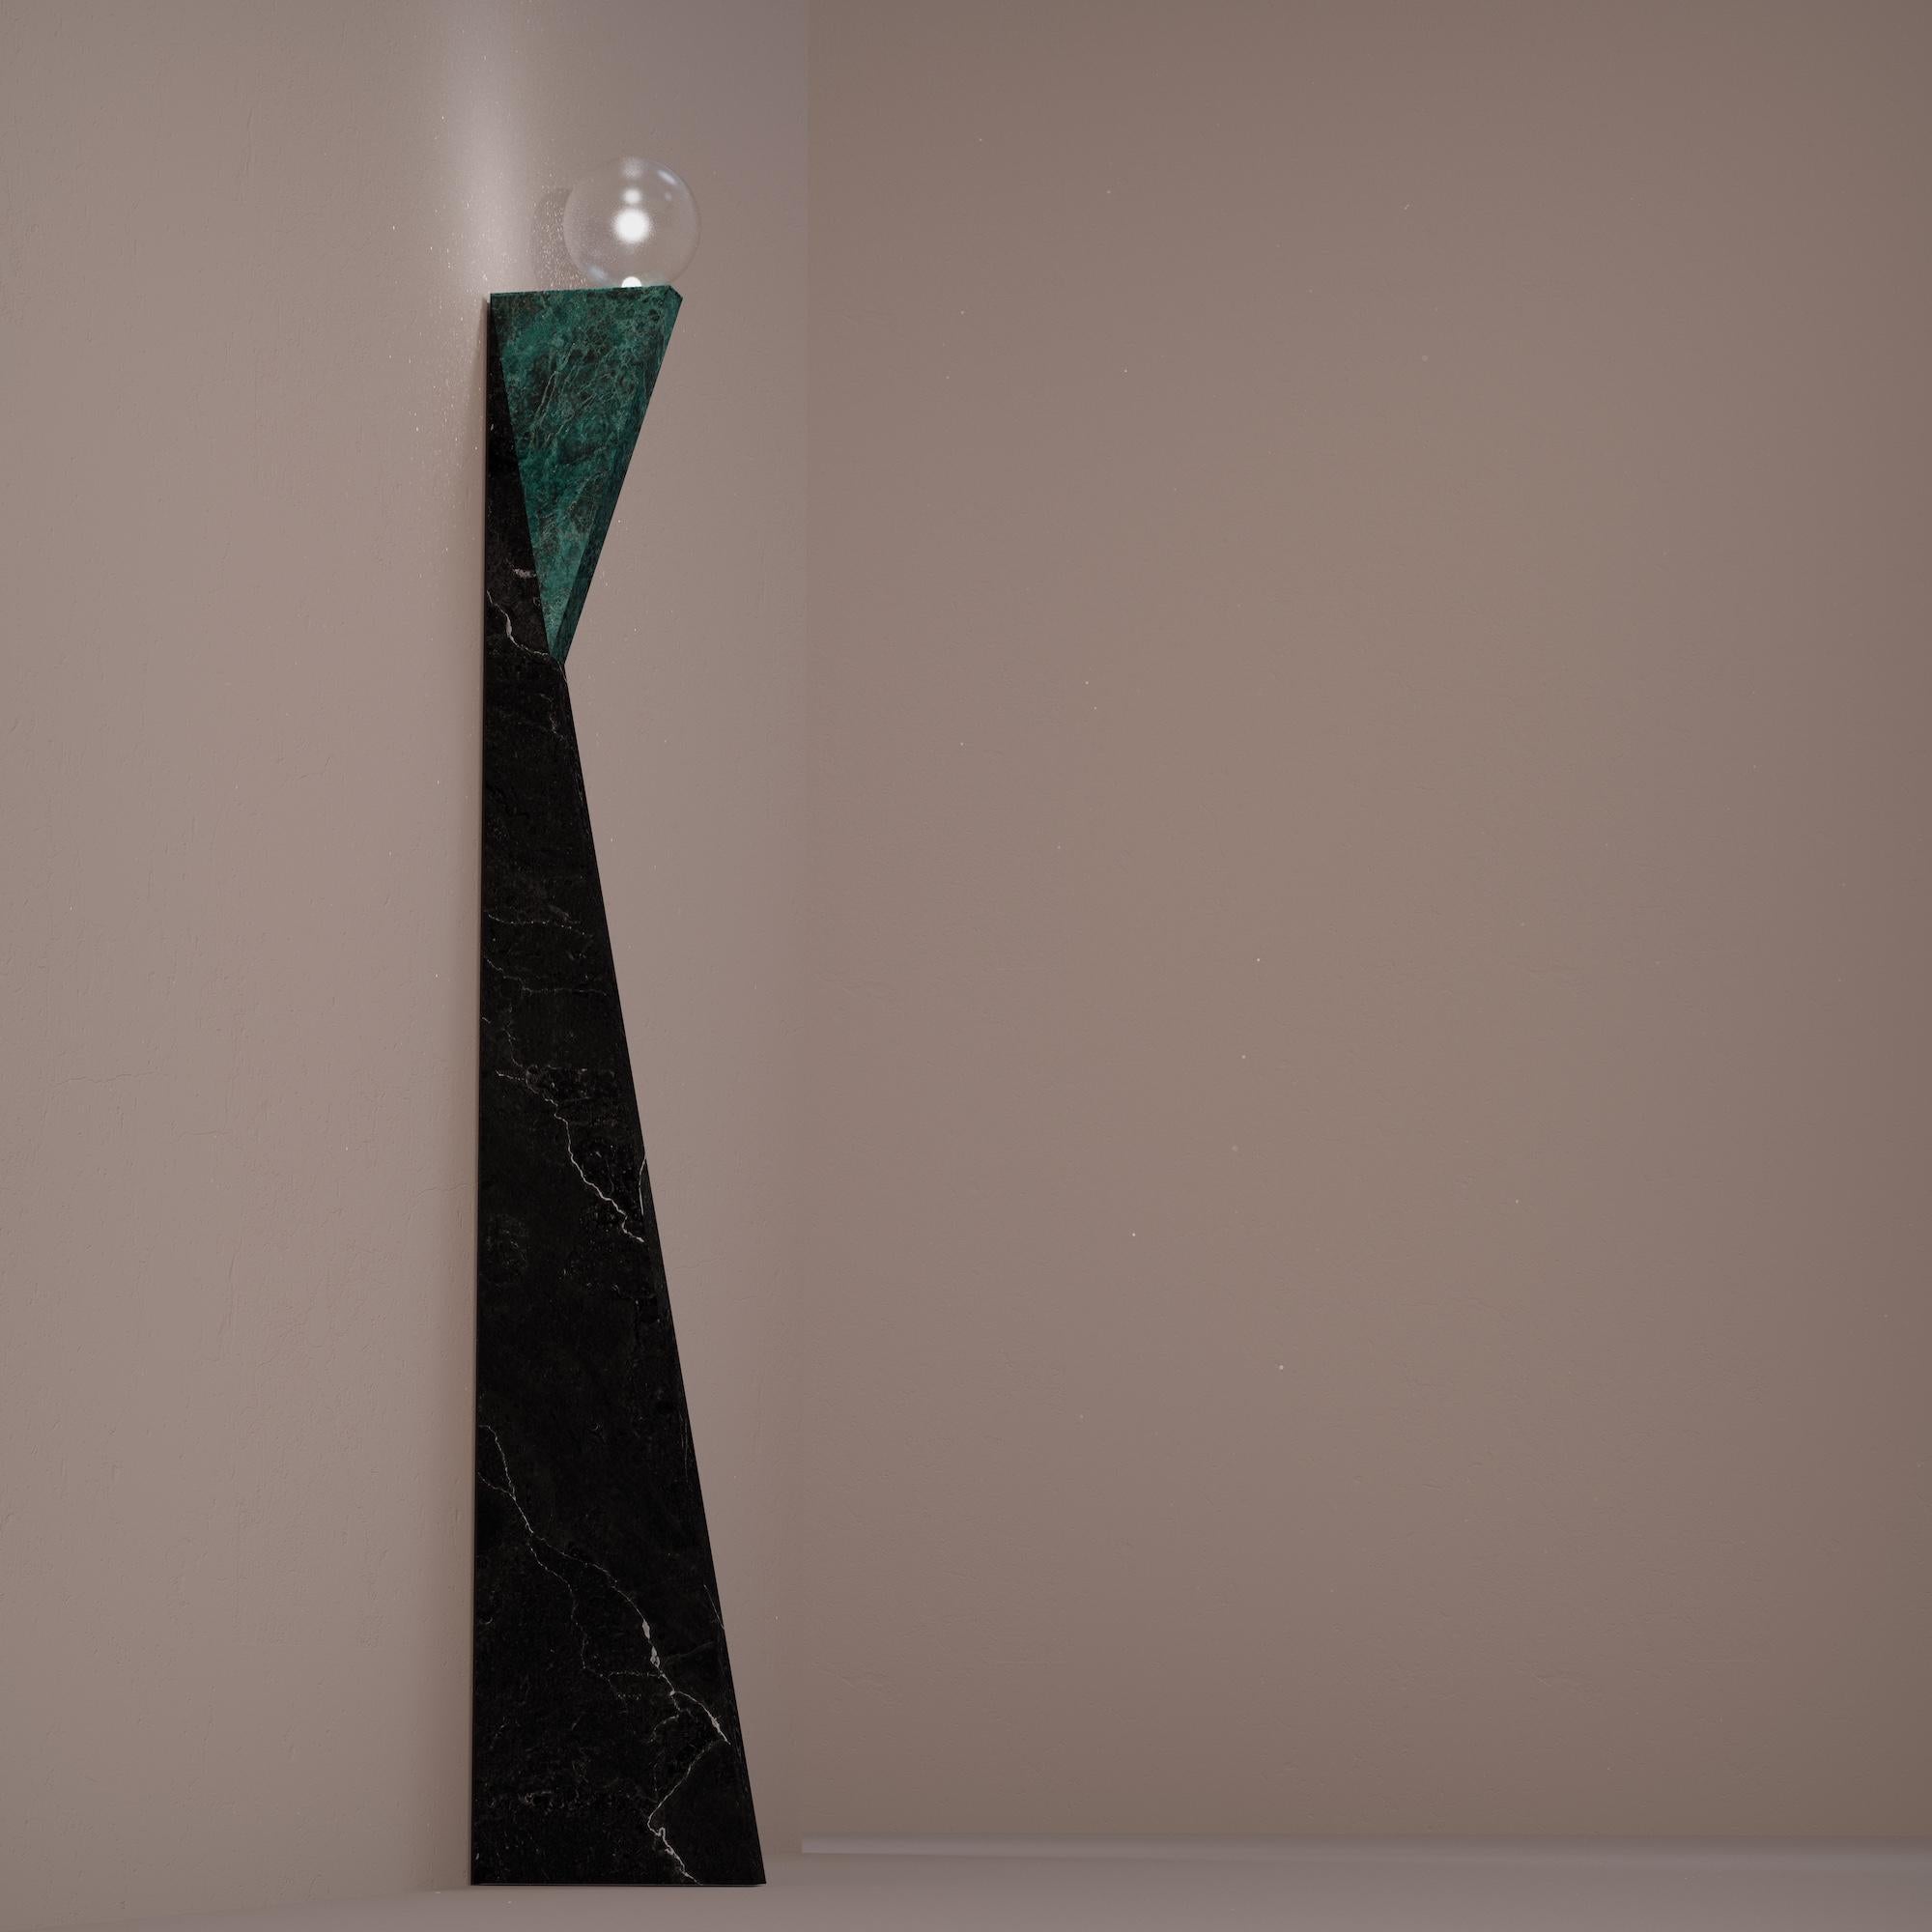 About
Minimalist Italian Marble Clitemnestra Floor Lamp for October Gallery

Clitemnestra Floor Lamp
Design by CARCINO Design exclusively for October Gallery
Floor Lamp
Materials: Green Alpi Marble, Opal Glass Bulb
Dimensions: H 185 W 15 D 30 cm / H